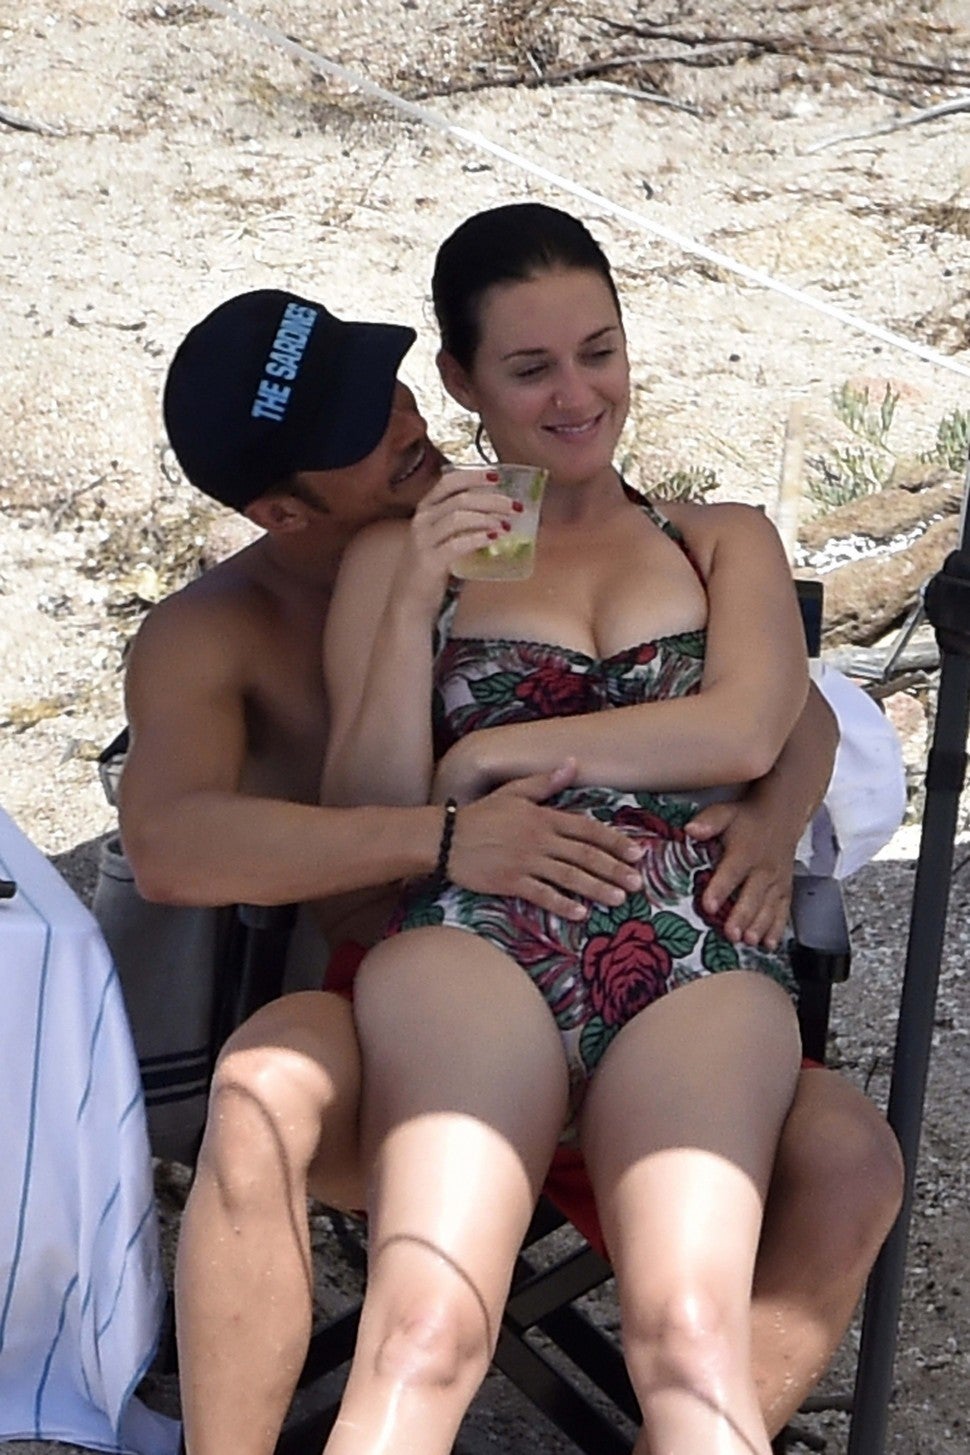 Katy Perry Porn For Real - Orlando Bloom Gets Super Touchy Feely on Vacation With Katy Perry |  Entertainment Tonight